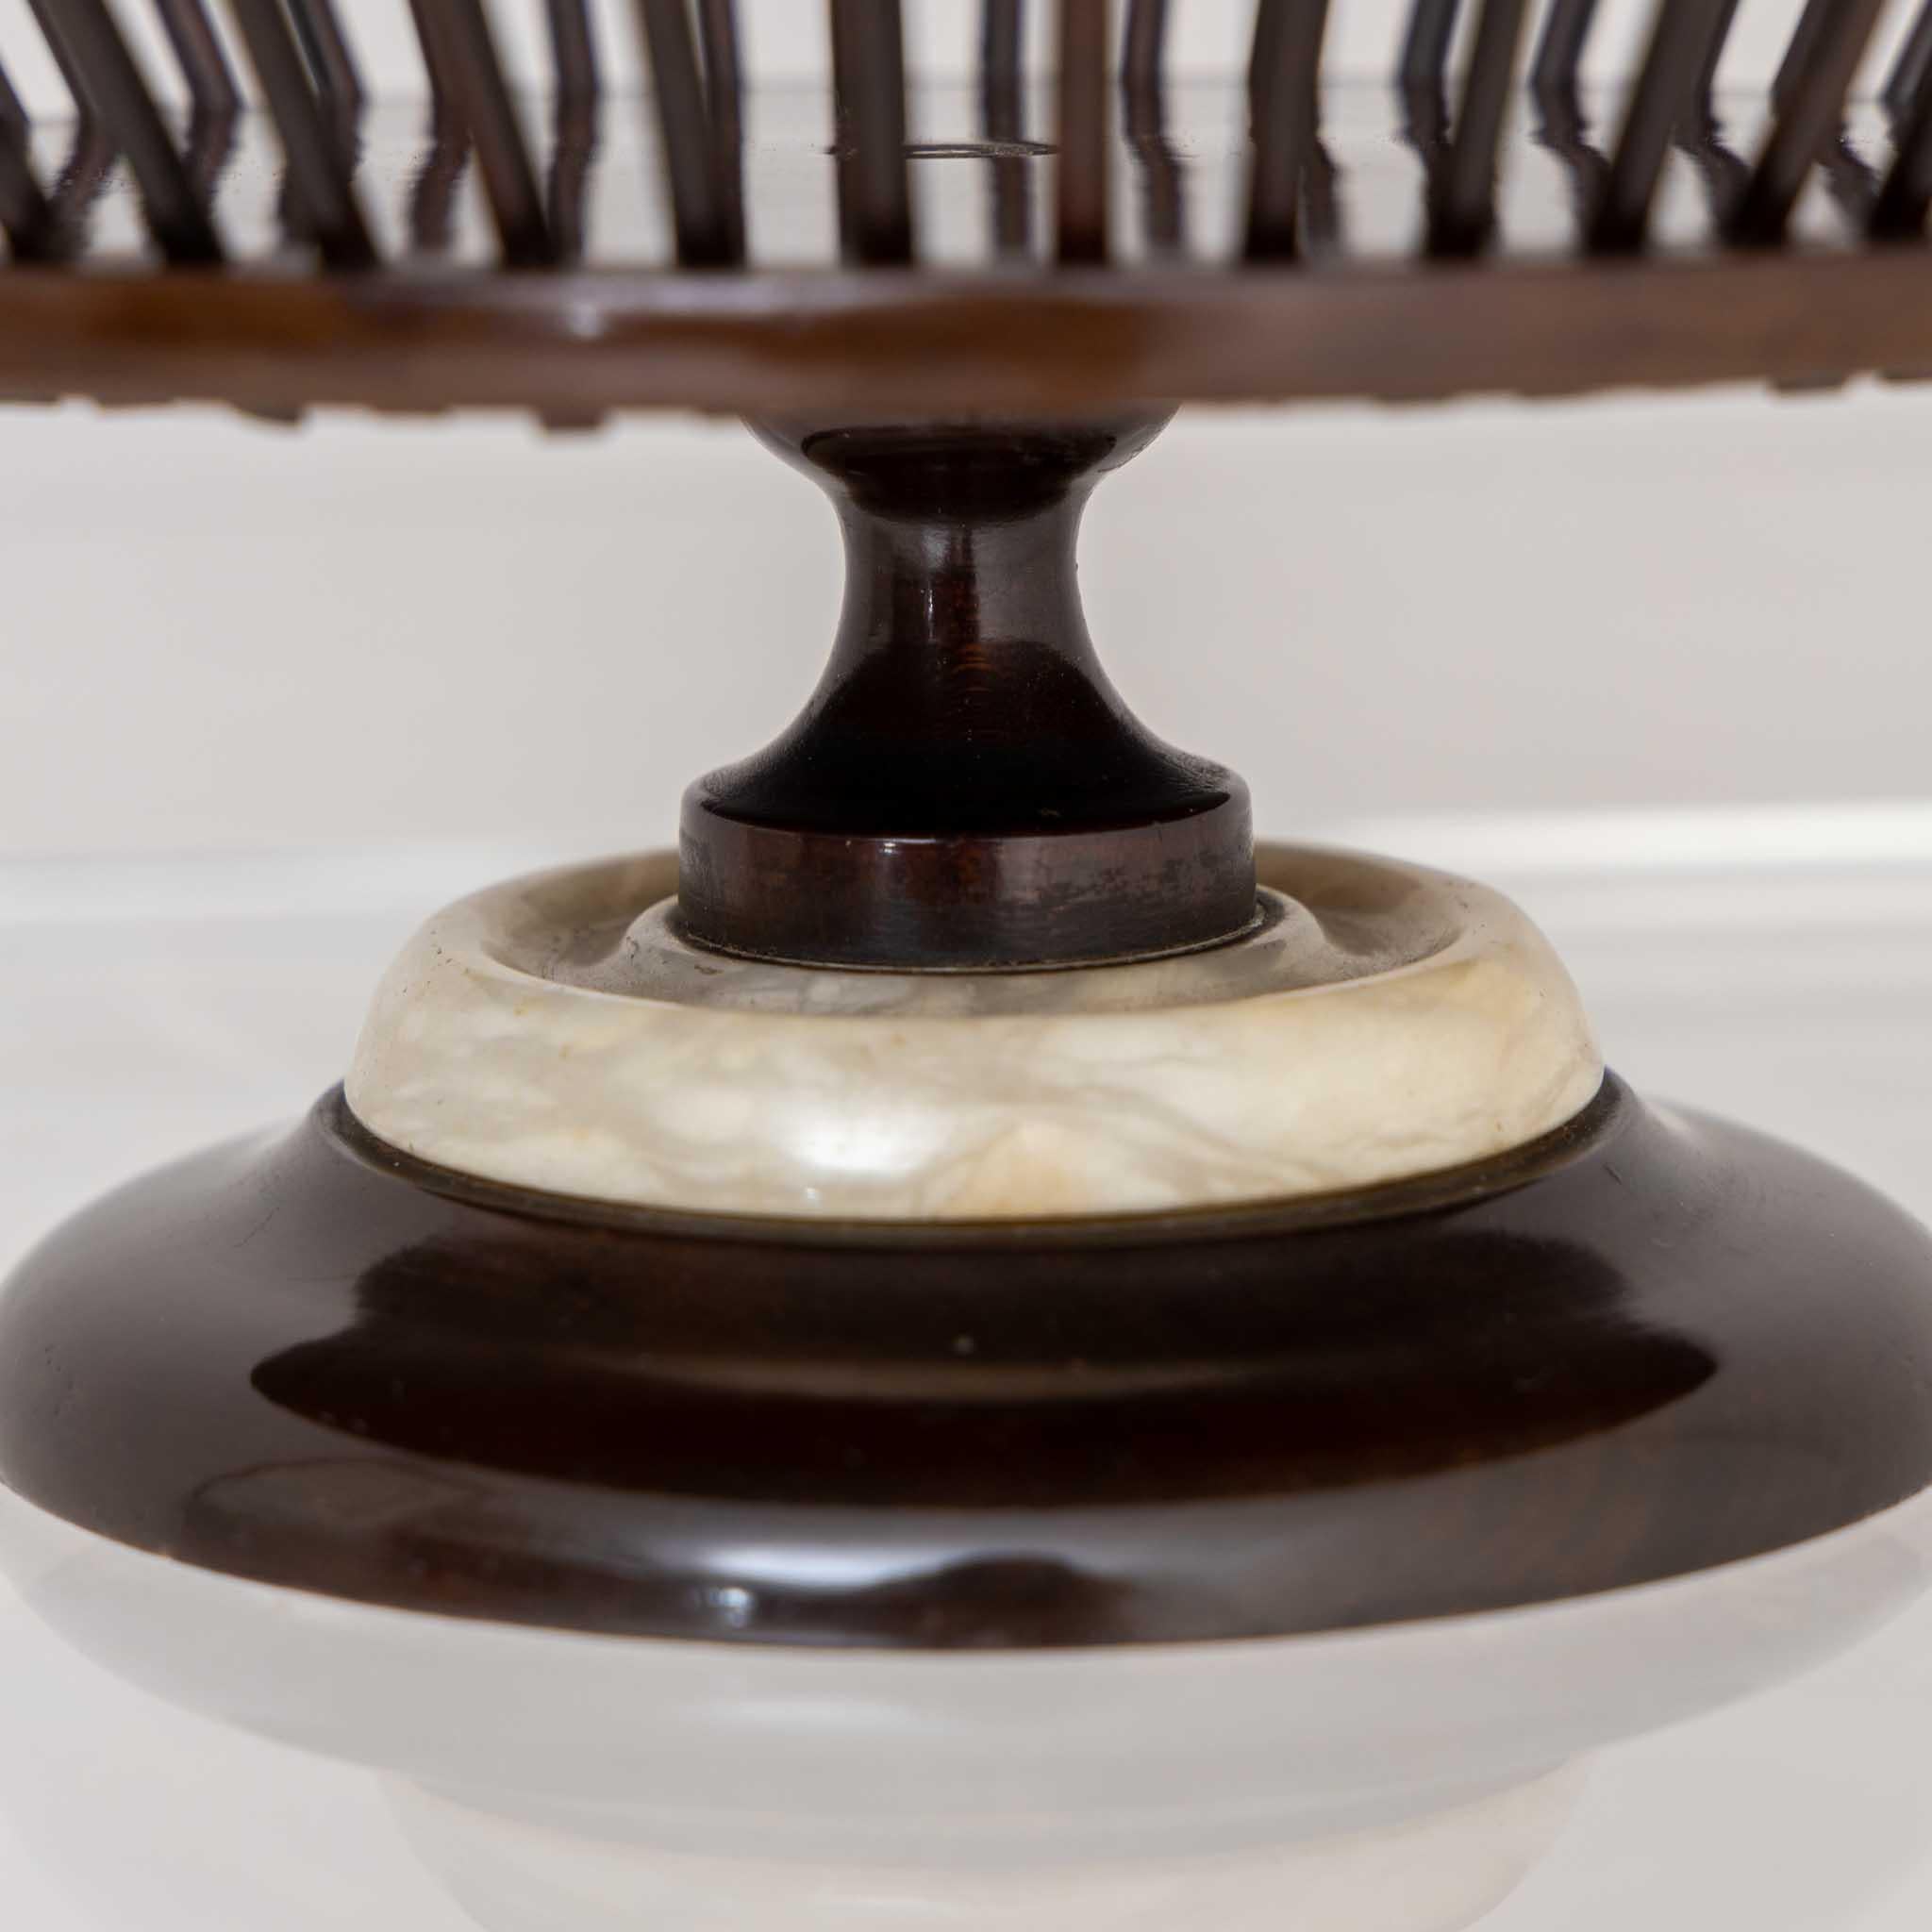 Small centerpiece with balustered base with stone ring and basket top made of dark stained wood. A ball of wool was placed in the center and the strings pulled through between the slats to spun yarn. 